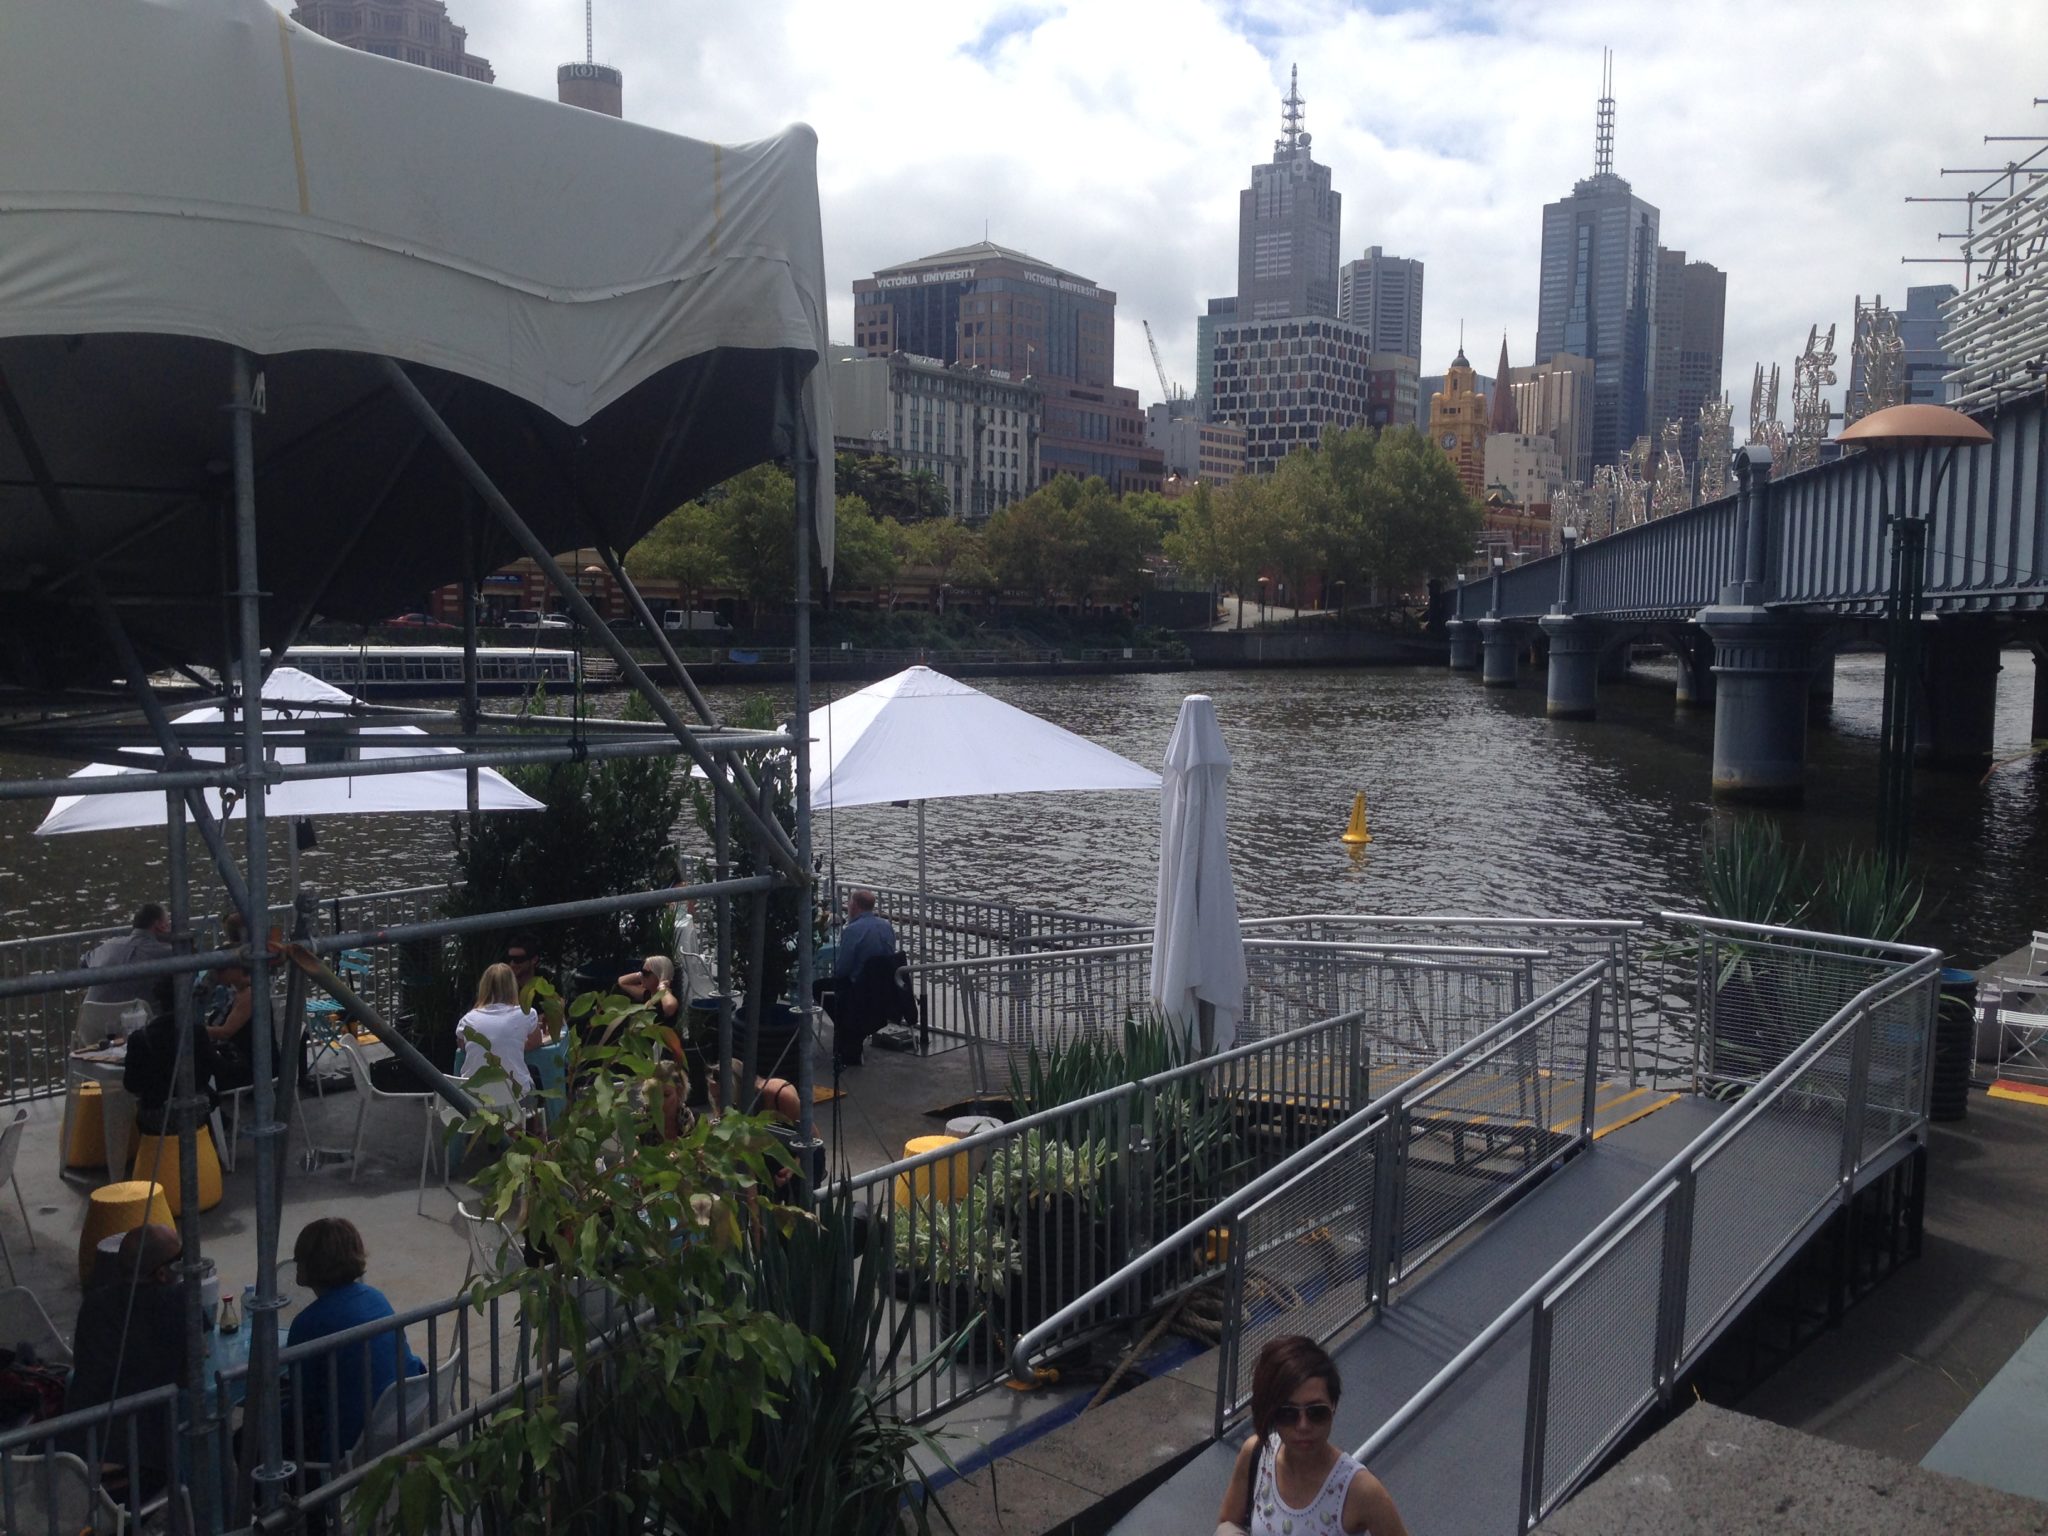 The Raingarden and the Melbourne Food and Wine Festival